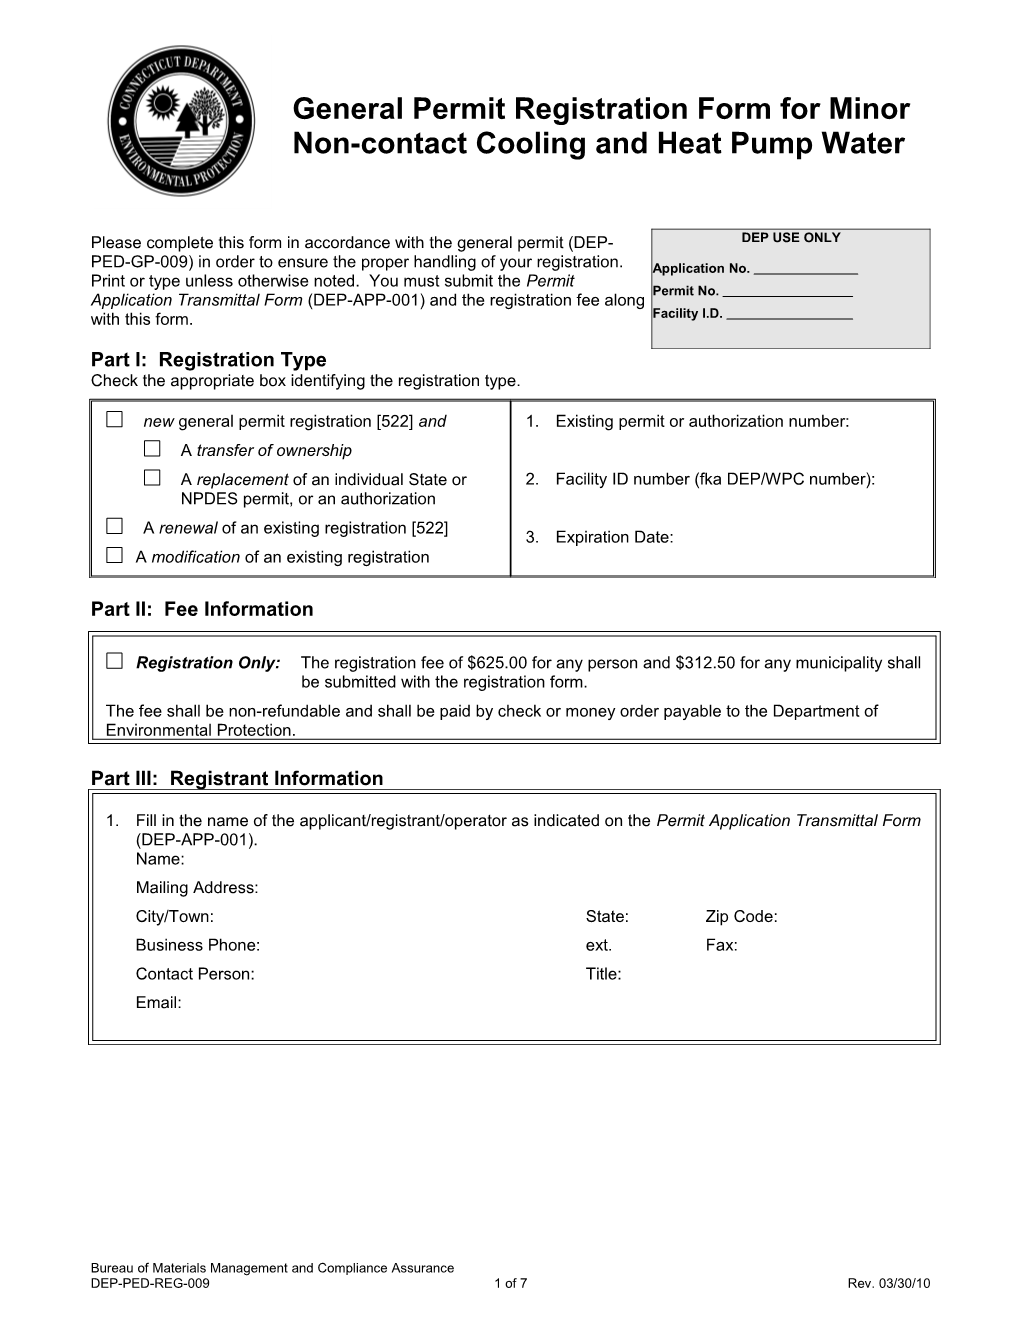 General Permit Registration Form For Minor Non-Contact Cooling And Heat Pump Water